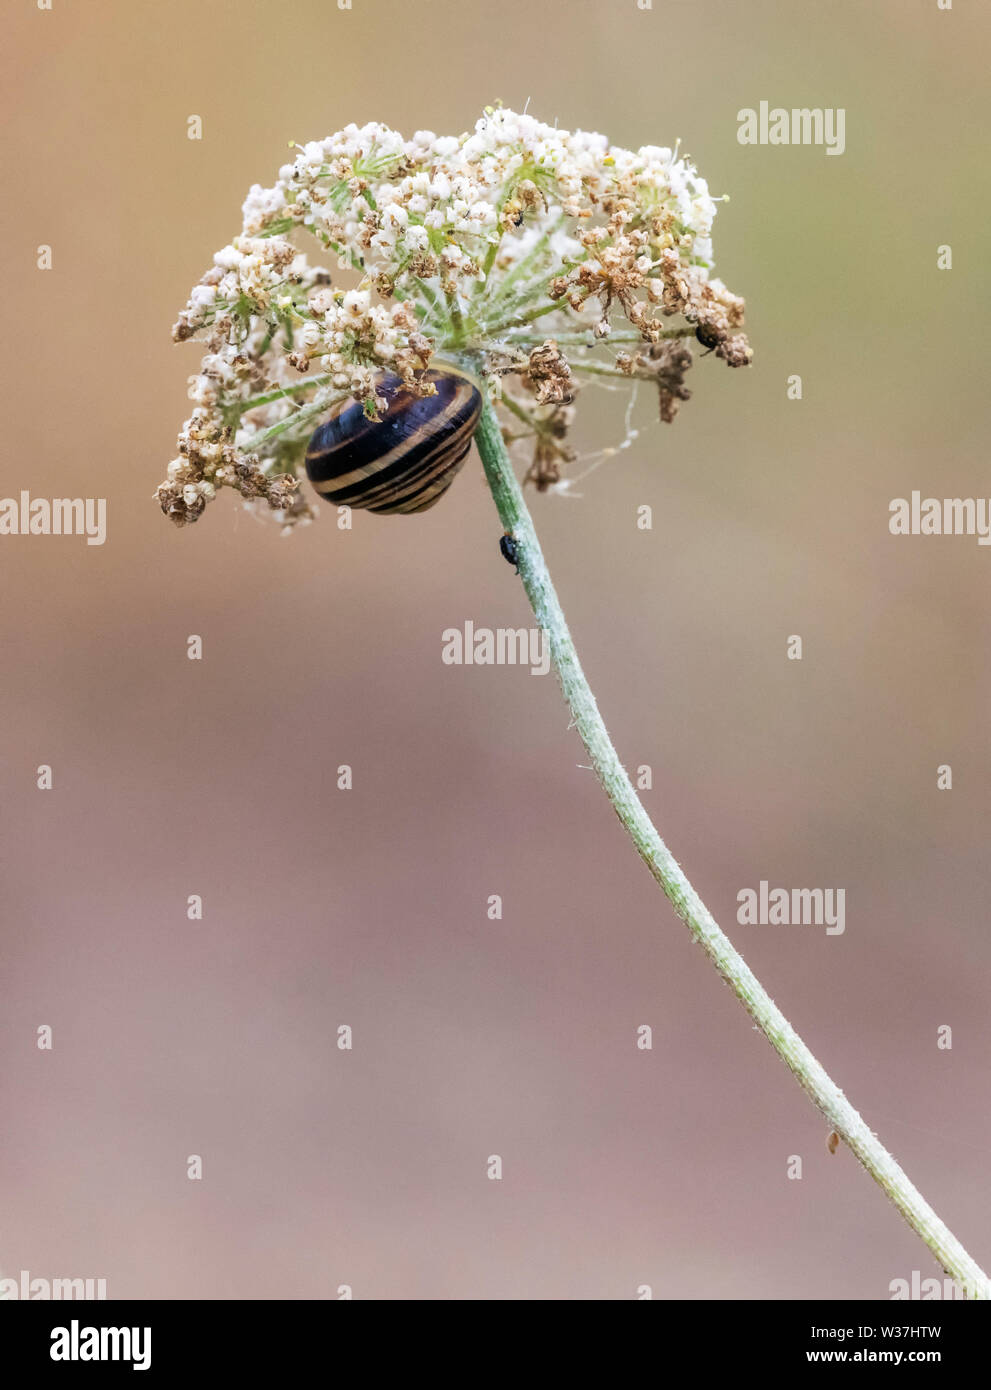 Snail with striped shell at rest under the flower head of a Queen Anne's Lace plant Stock Photo